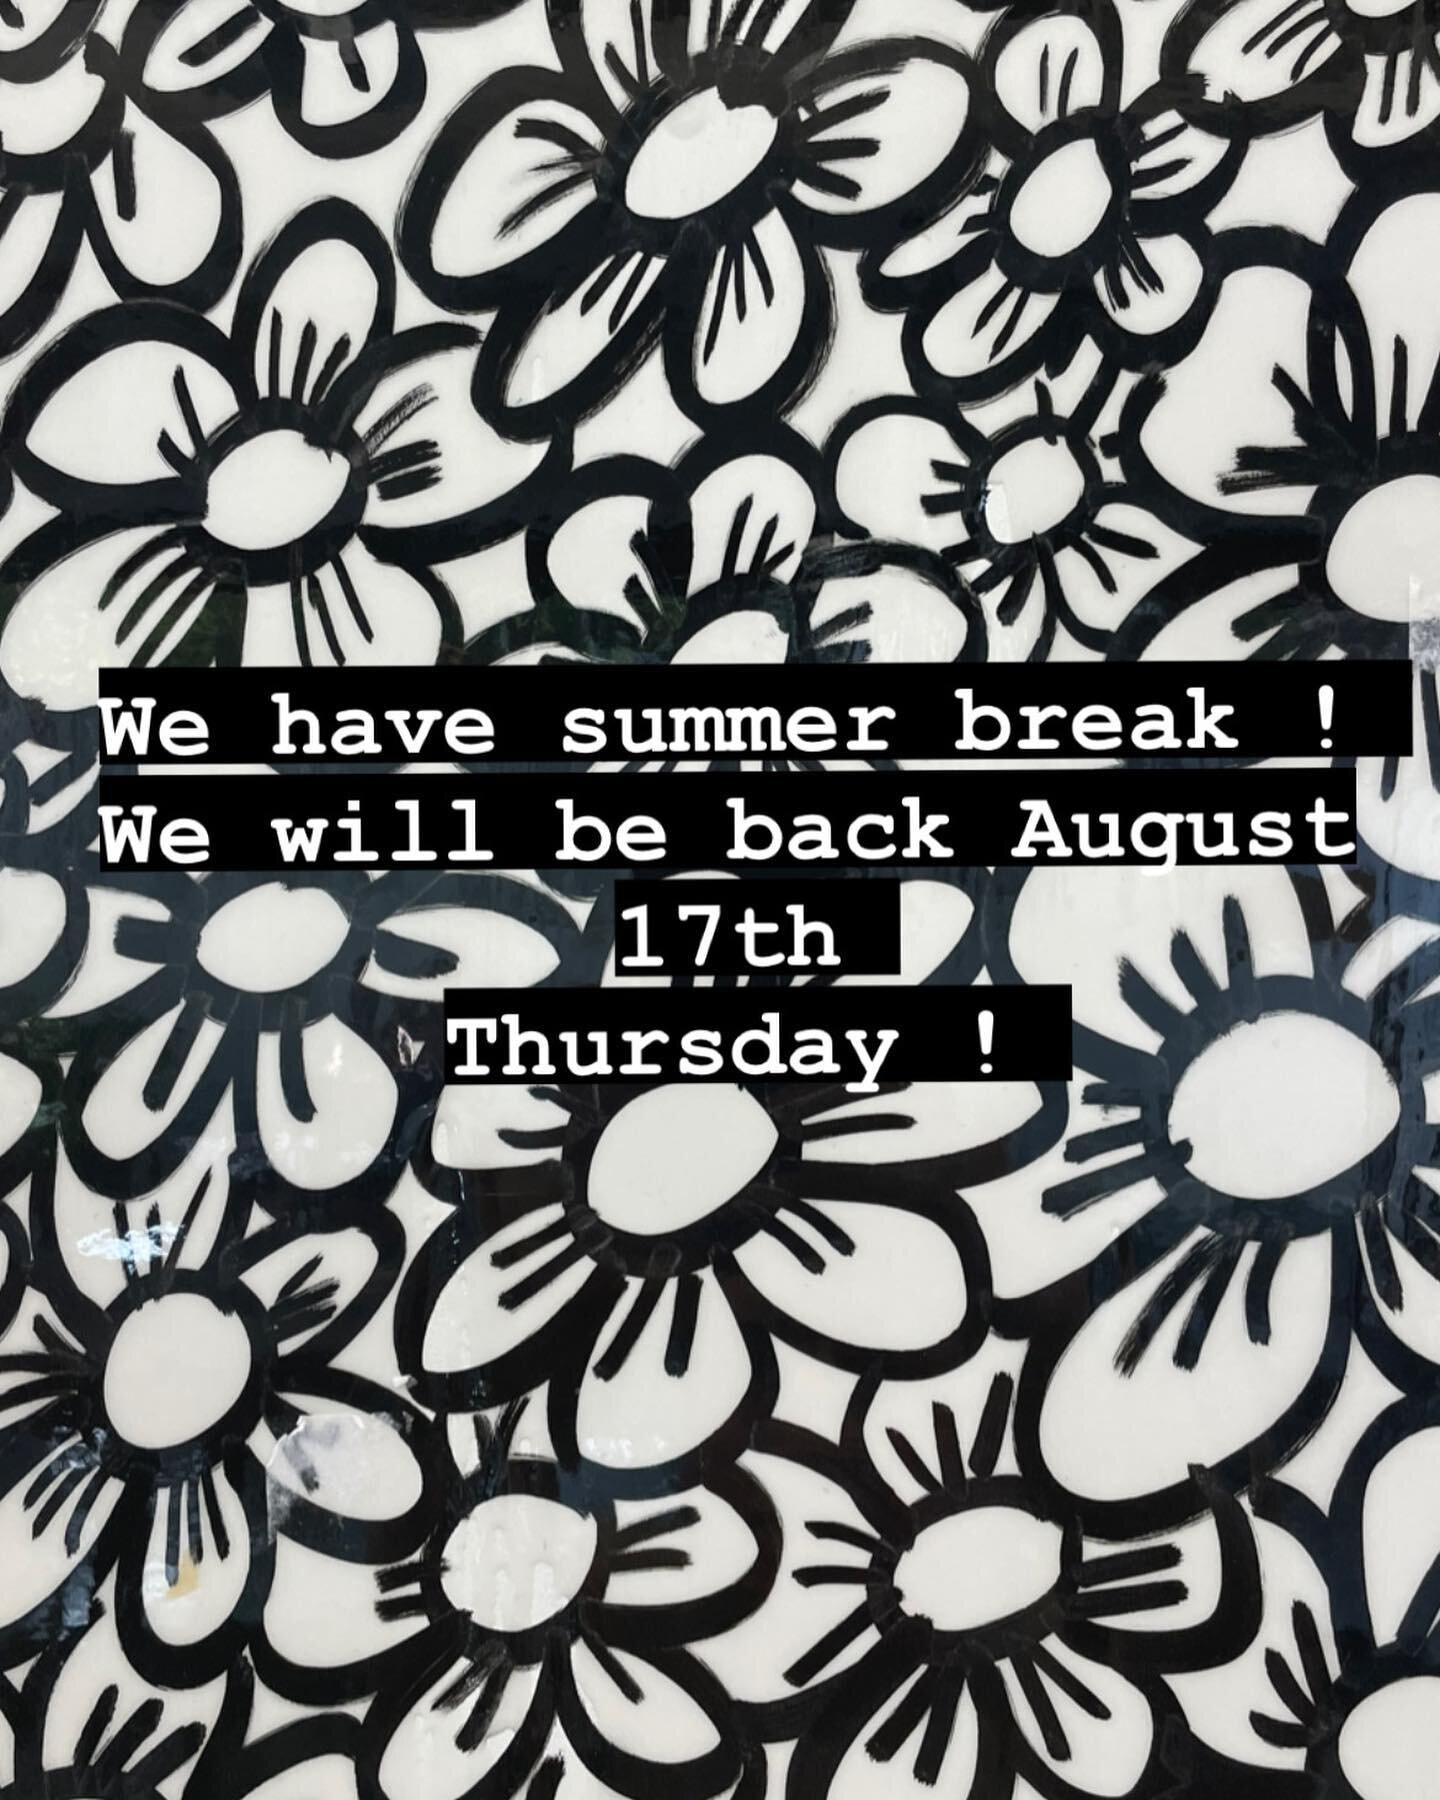 We are closed till August 17th Thursday! We are taking a little summer break to rest and spend some family time 💚